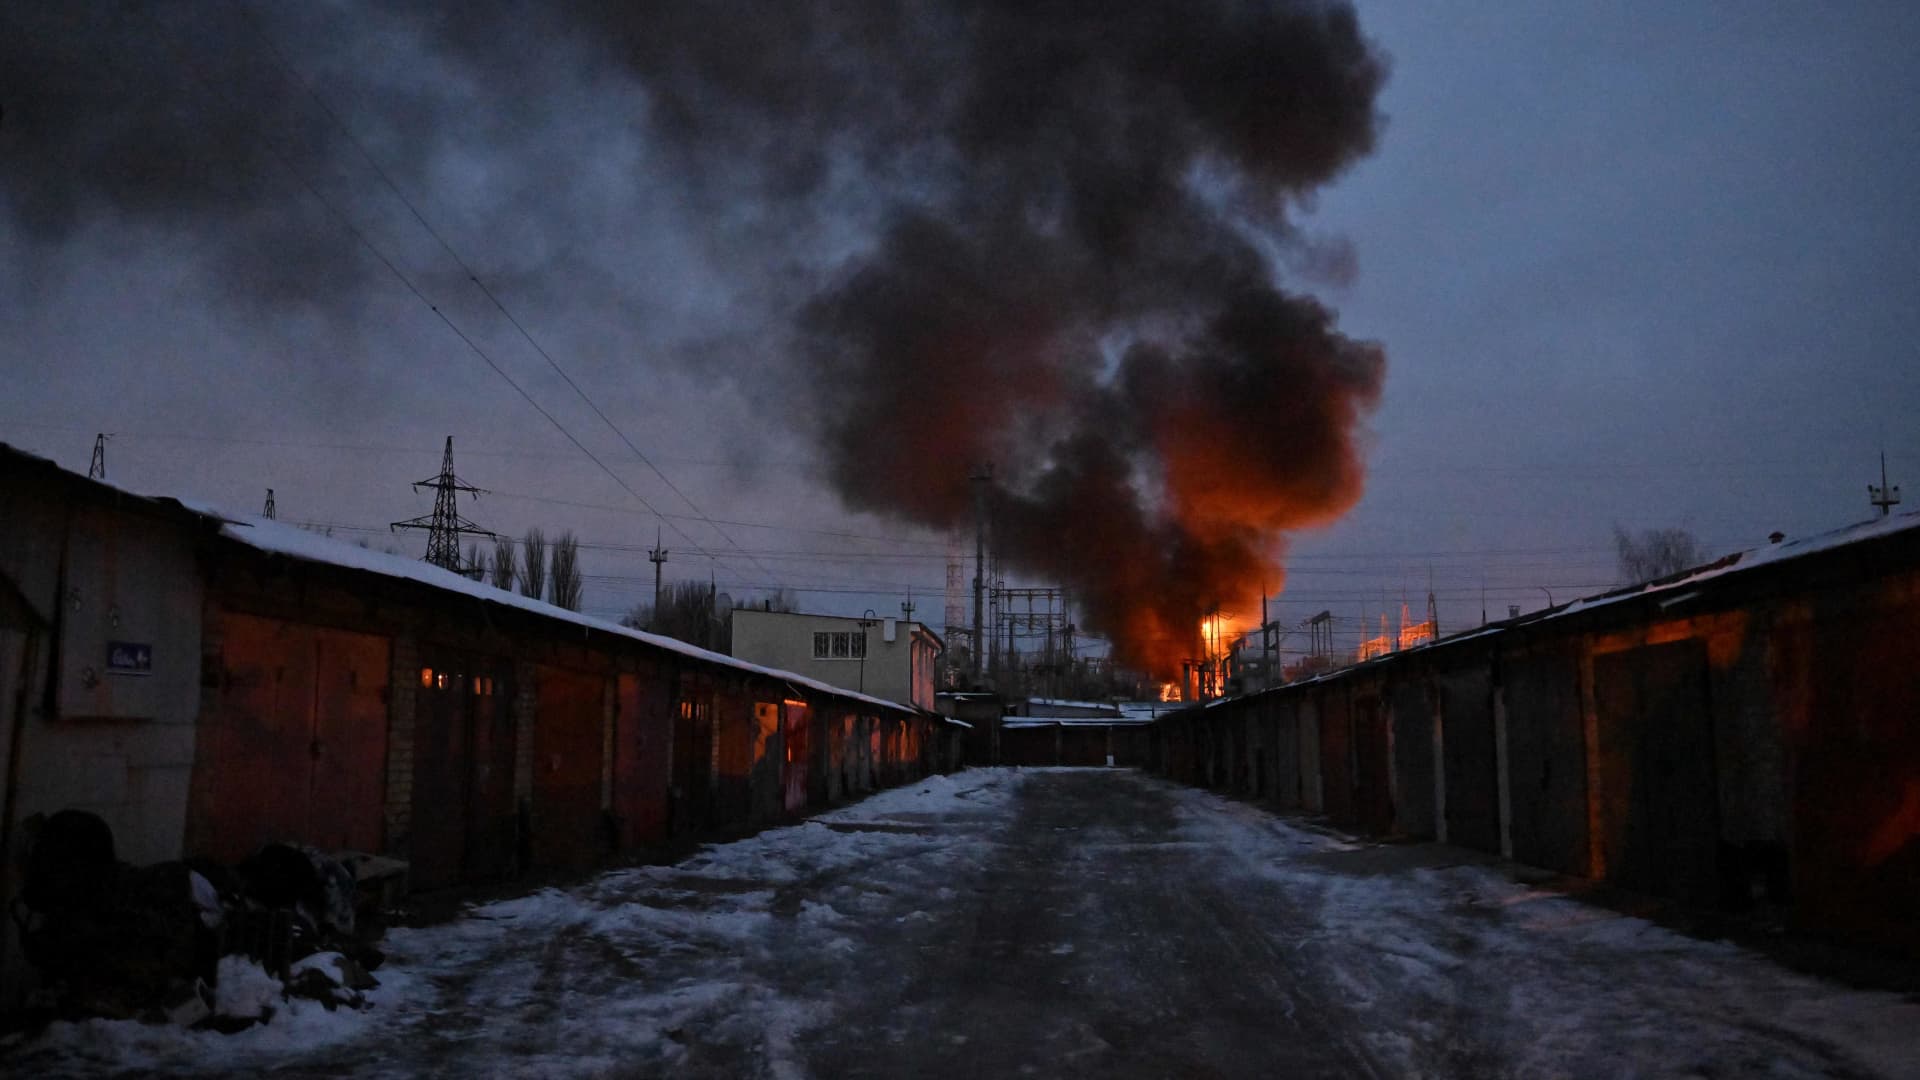 This photograph shows an object of a critical power infrastructure as it burns after a drone attack to Kyiv, amid the Russian invasion of Ukraine.